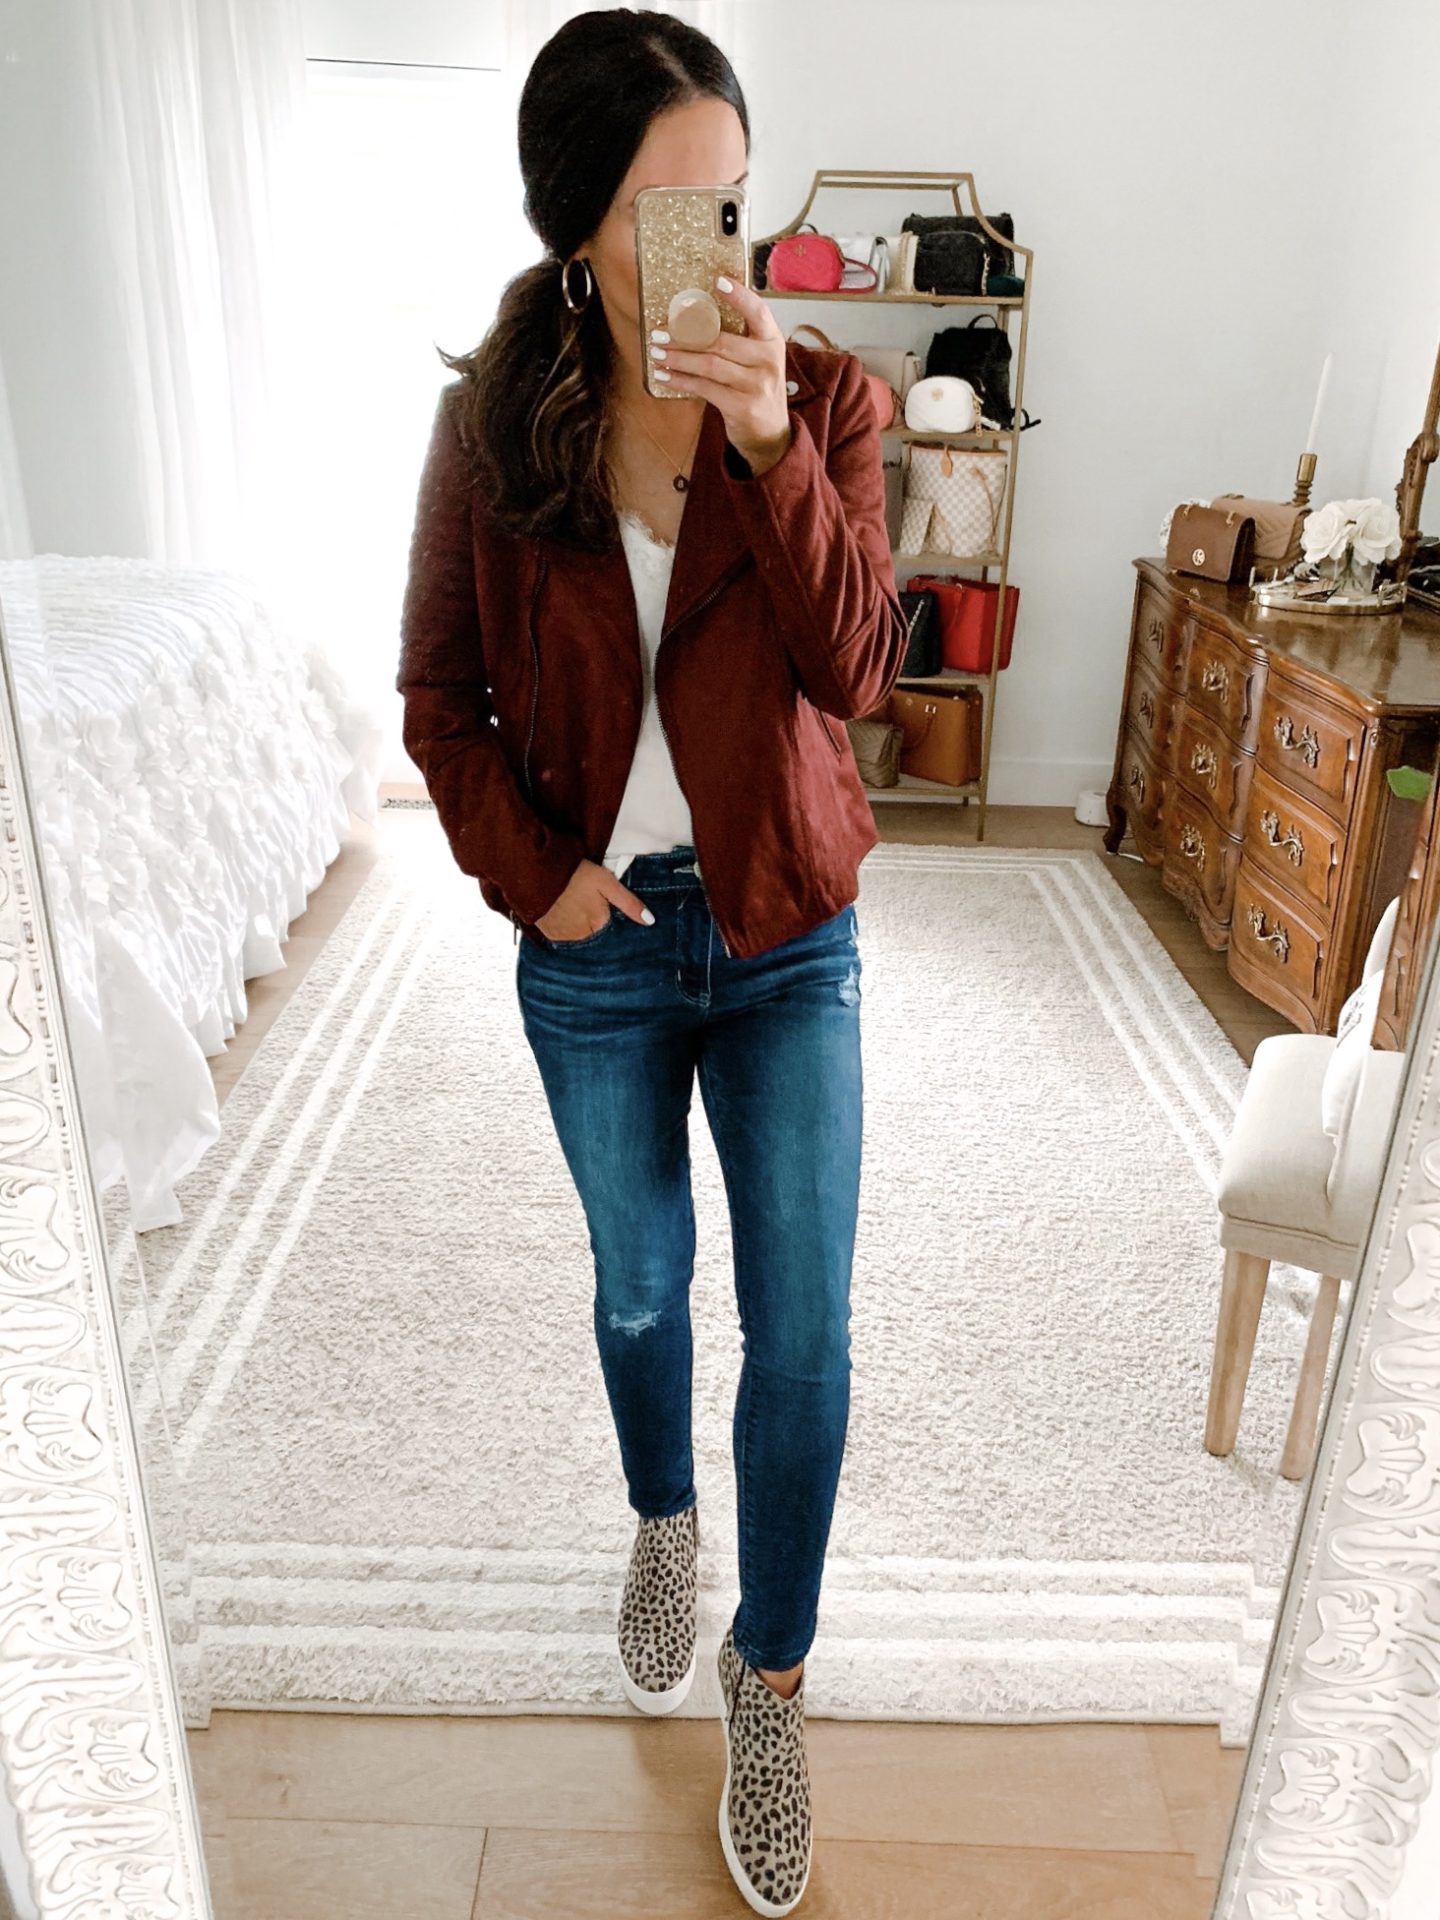 15 New Nsale Fall Outfit Ideas In Stock! - The Double Take Girls